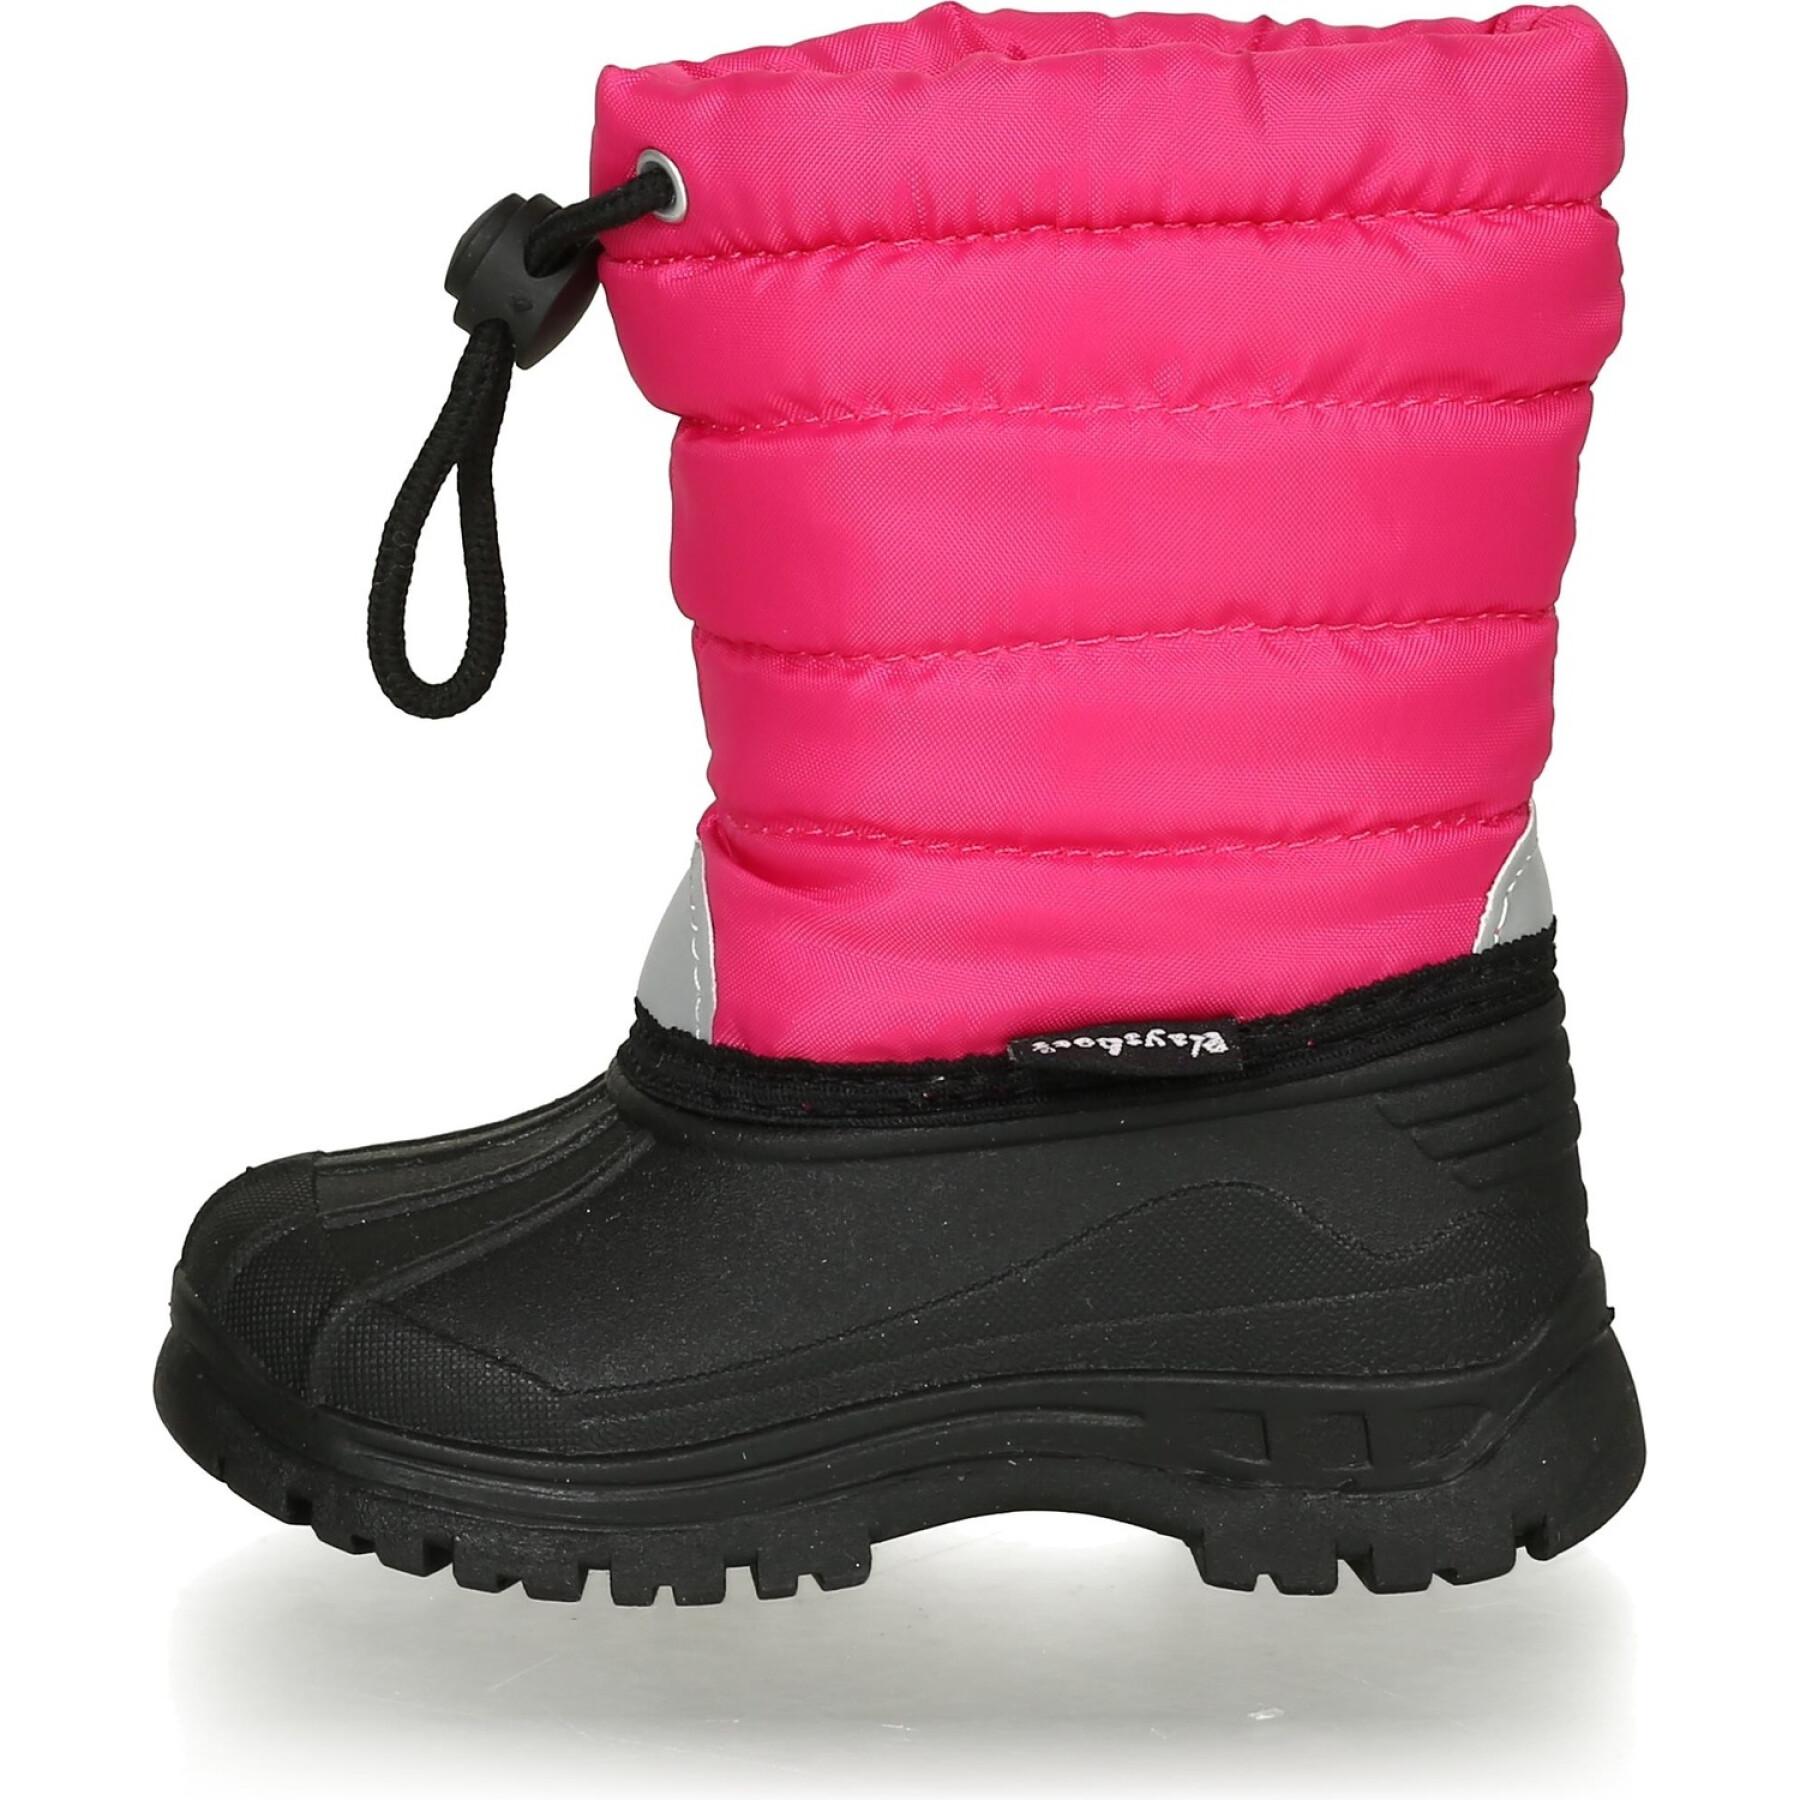 Children's winter boots Playshoes